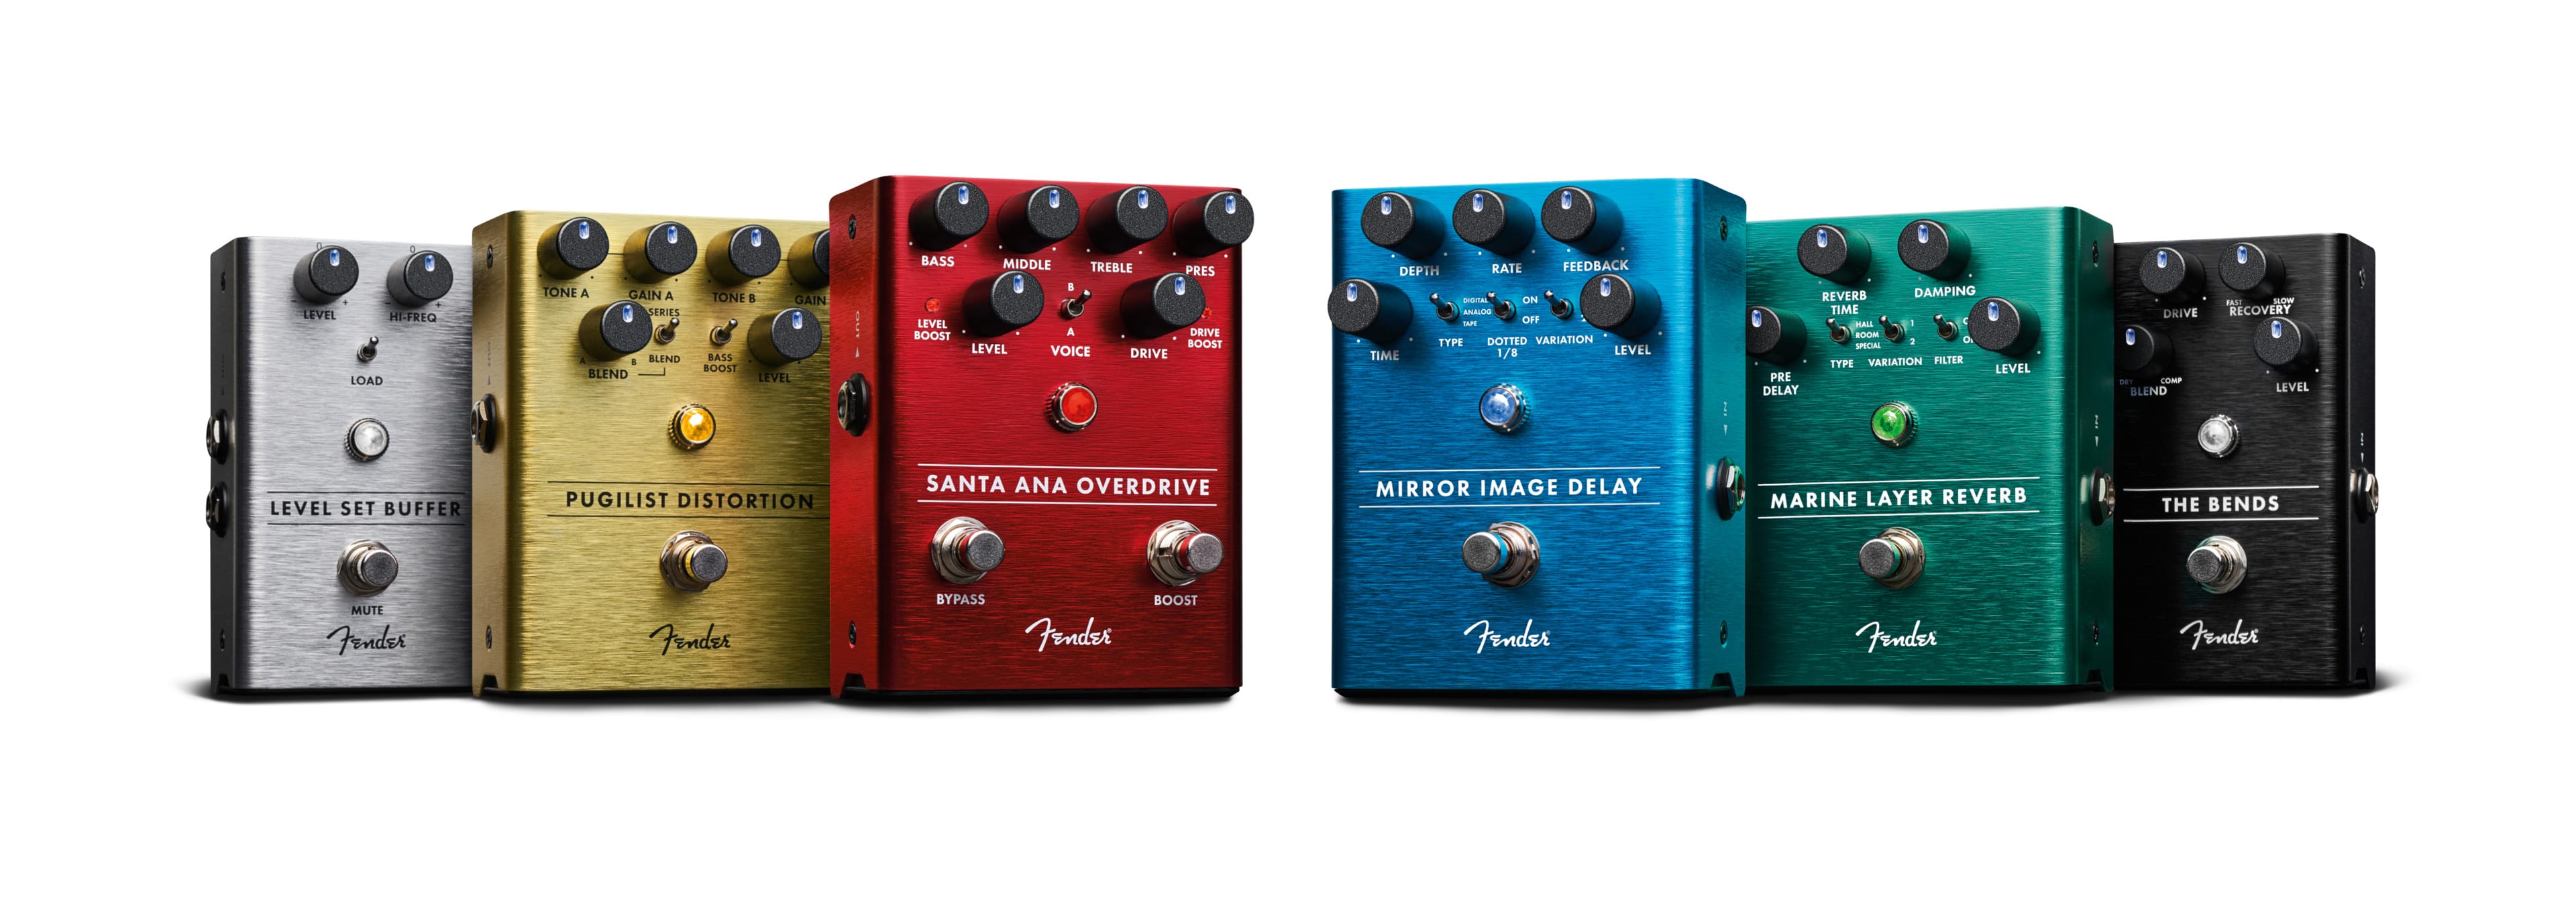 Fender® Takes On Pedals, Owns Tone With Six New All-Original Circuits